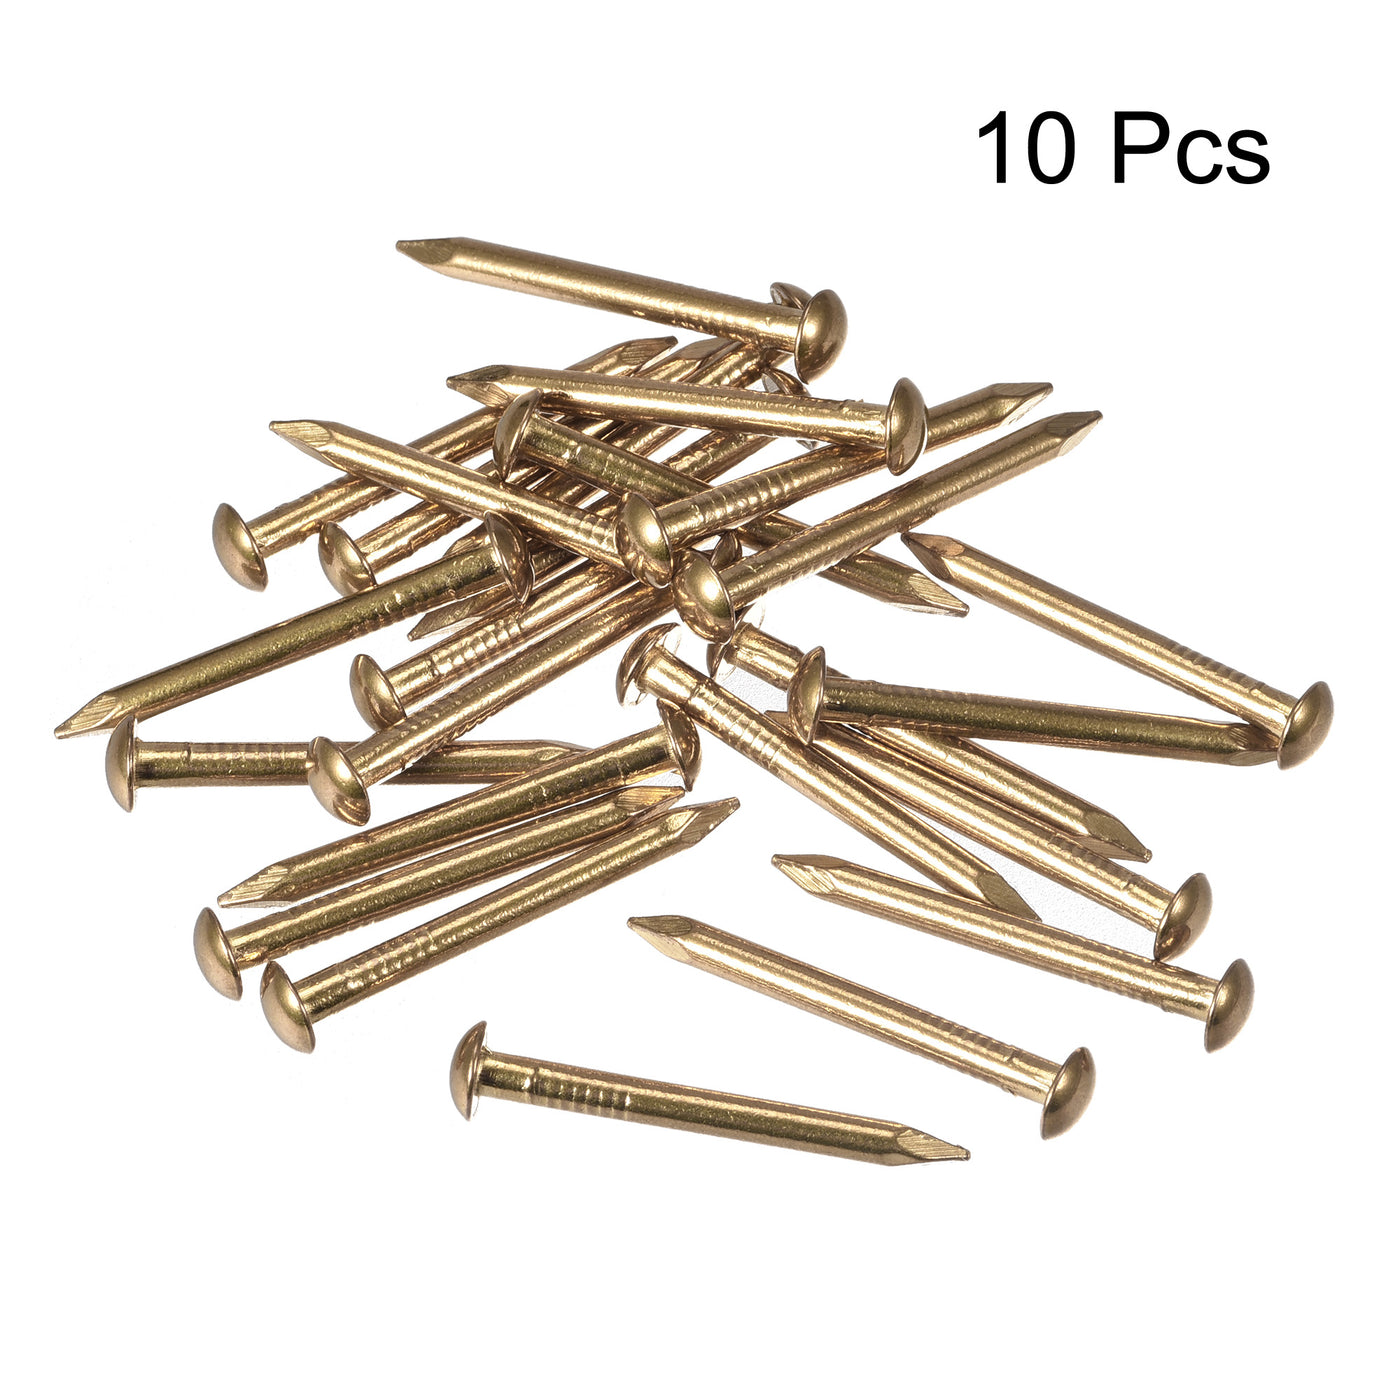 Uxcell Uxcell Small Tiny Brass Nails 2.8x25mm for DIY Decorative Pictures Wooden Boxes Household Accessories 25pcs